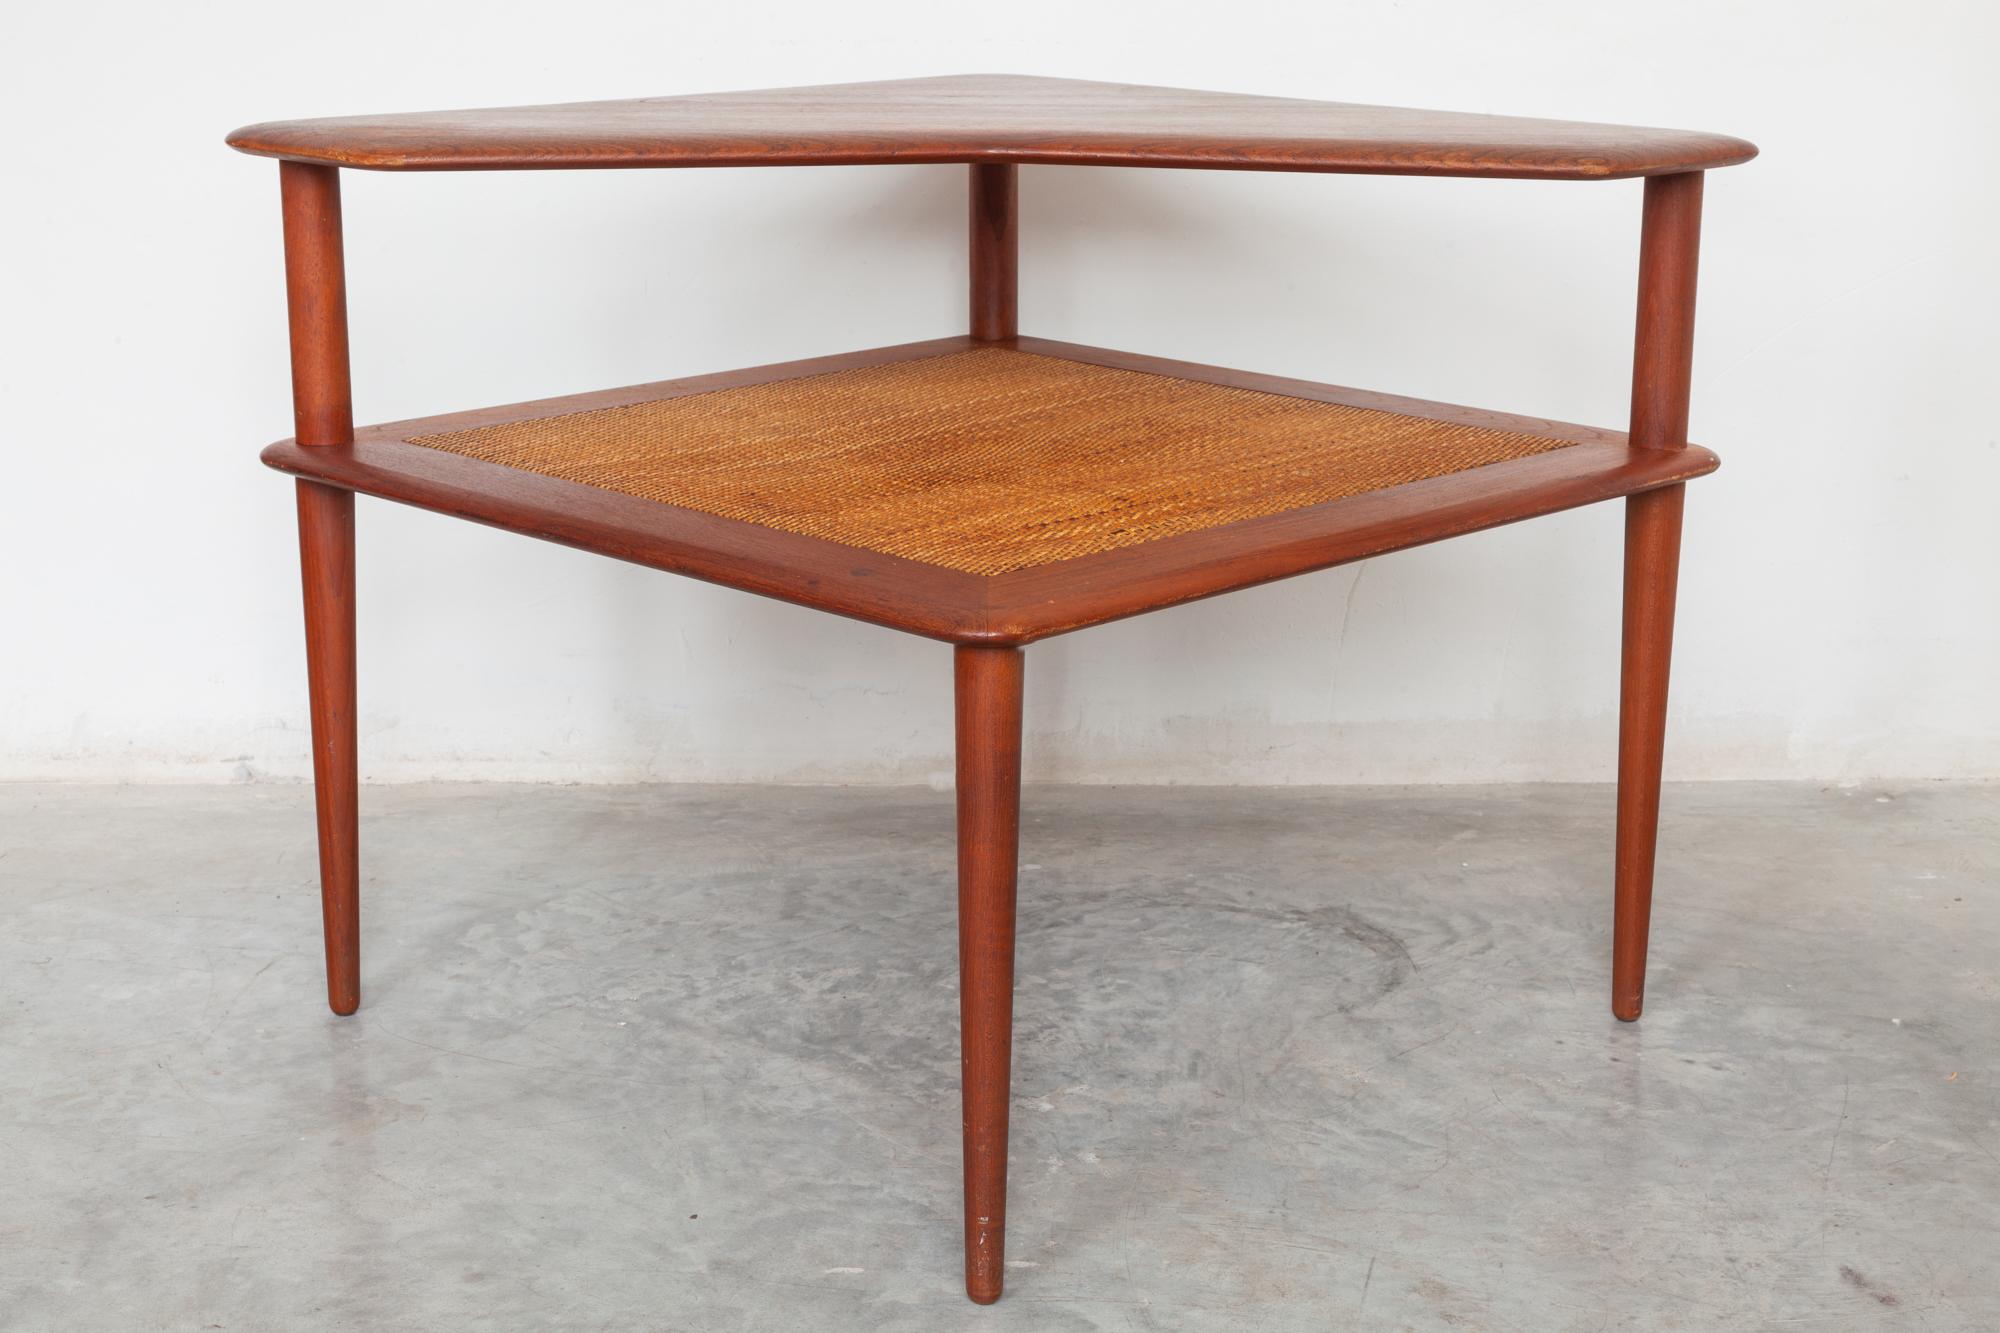 Midcentury teak corner table with woven rattan shelf. Excellent for use as a side
table or sofa table manufactured by France and Sons designer Peter Hvidt.